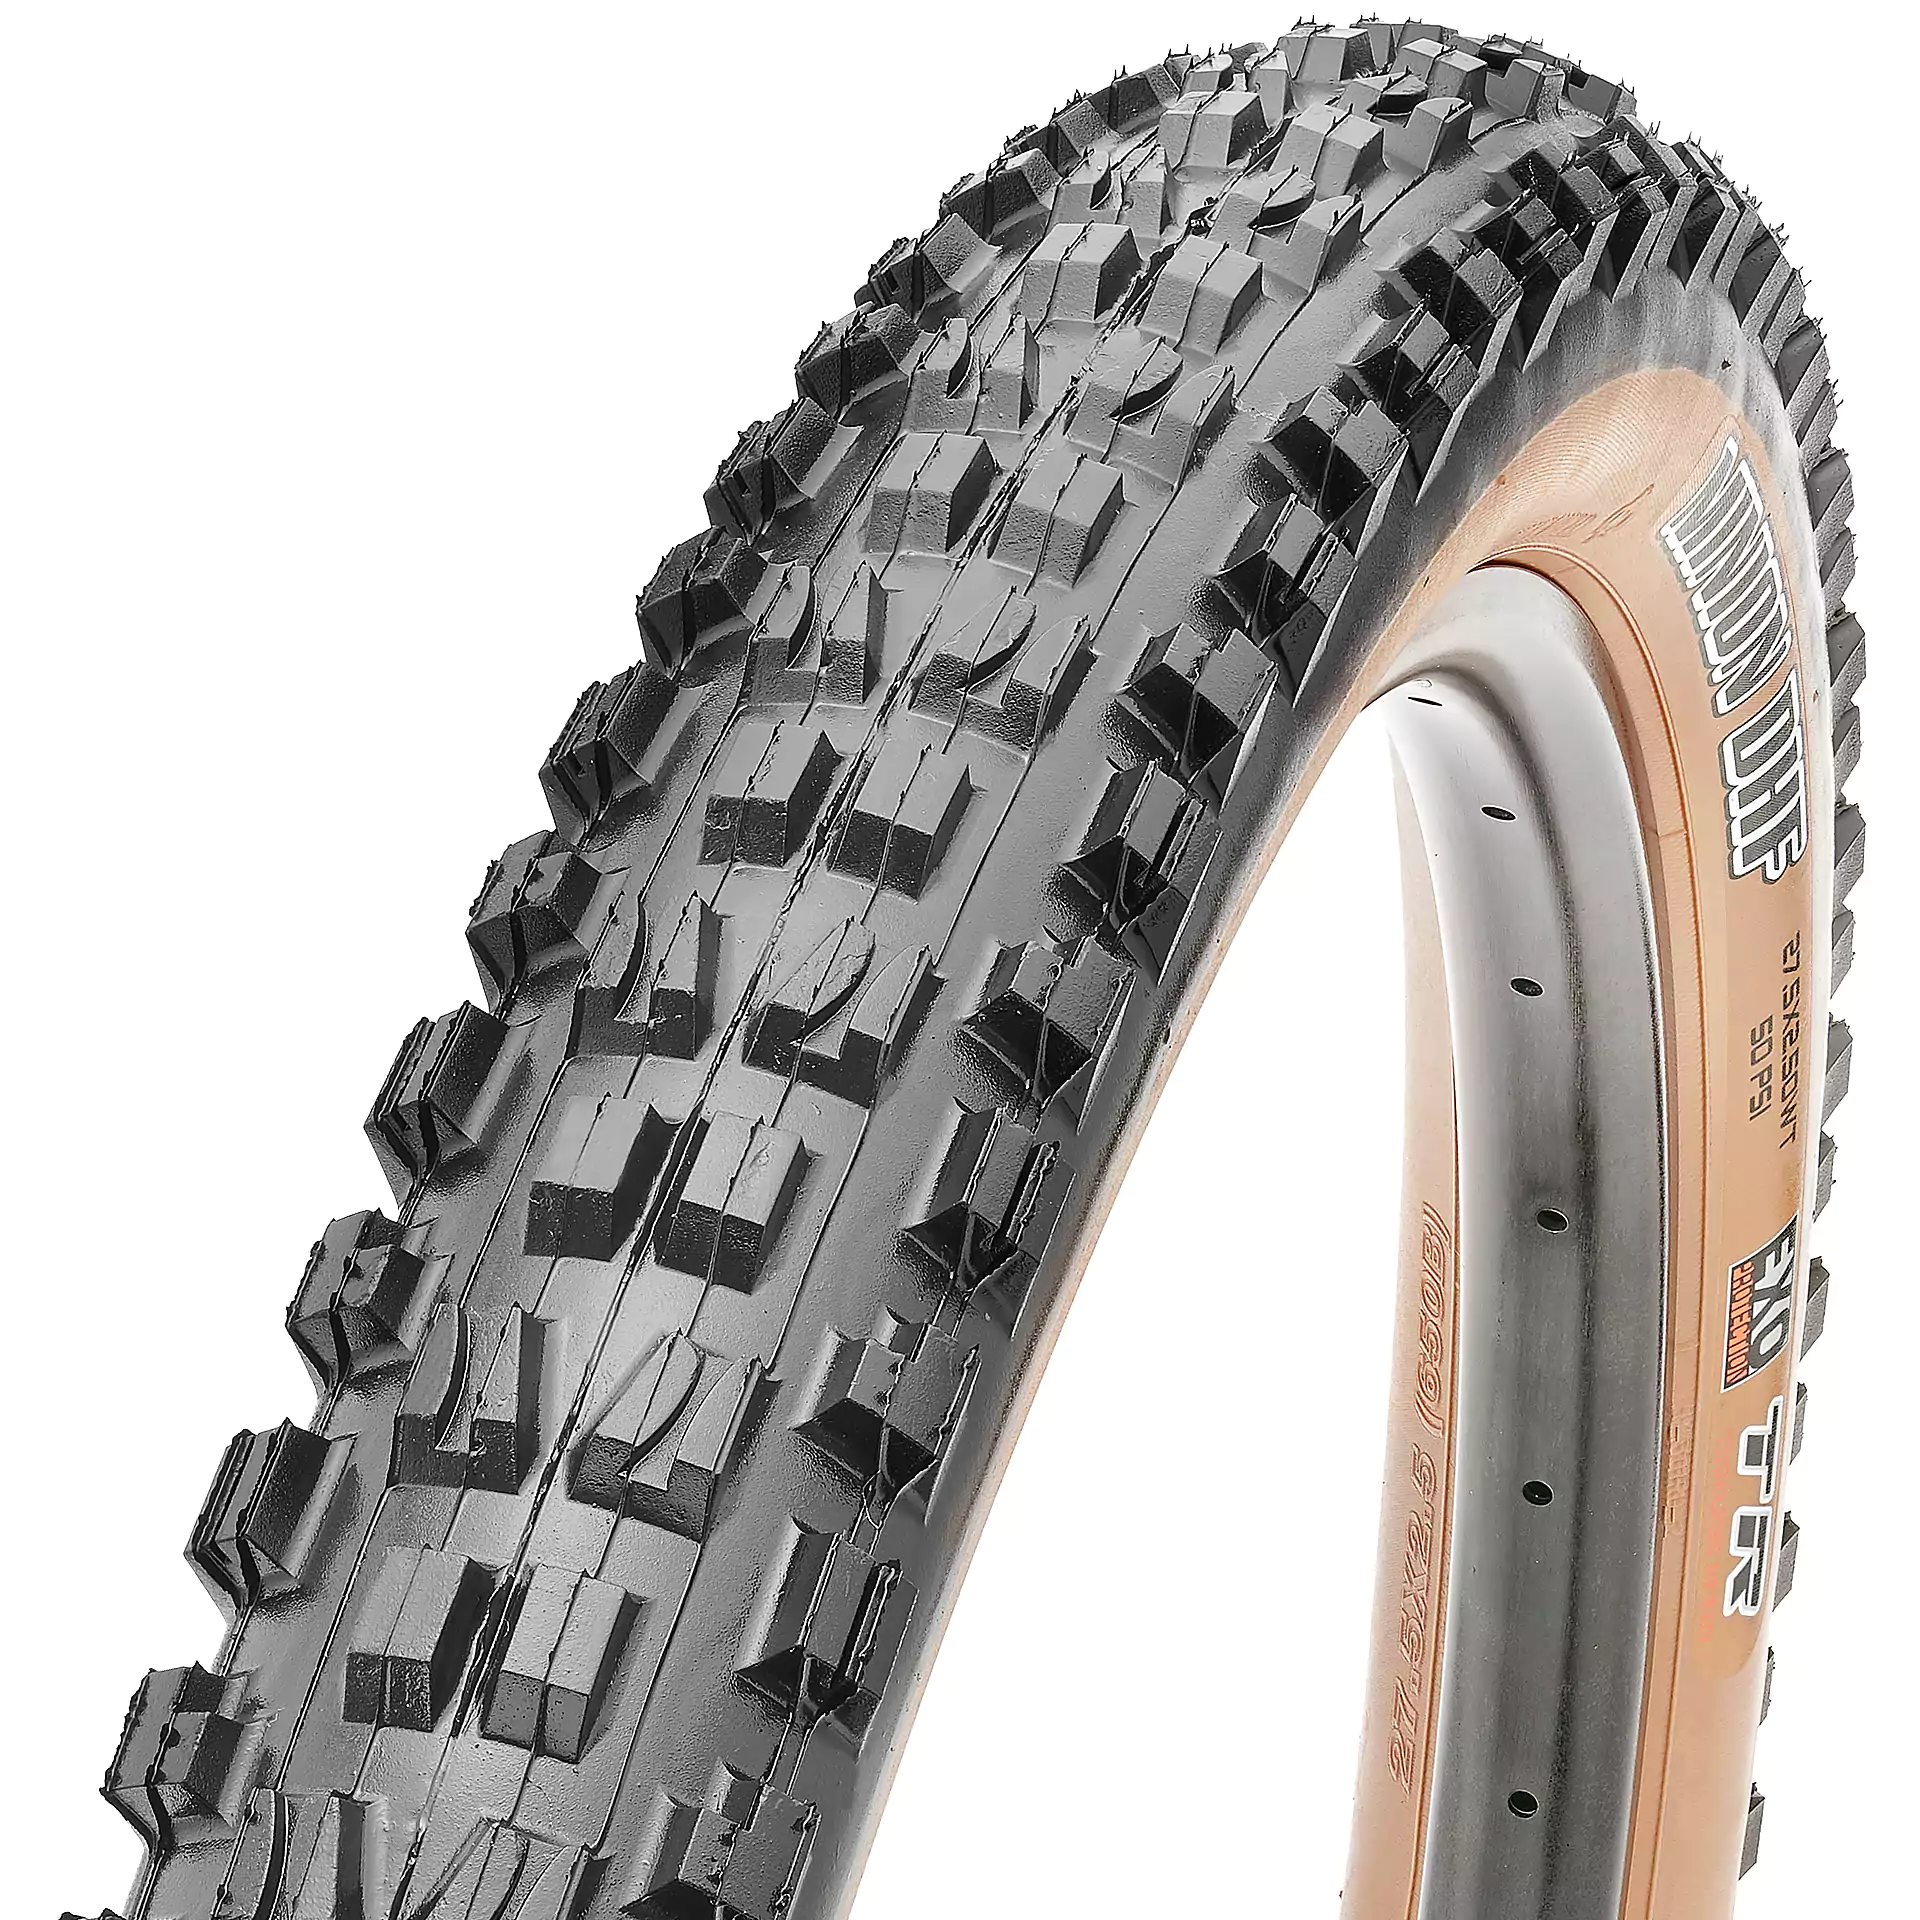 Maxxis Minion DHF Tire 27.5 X 2.6 60tpi Folding Dual Compound Tubeless Black for sale online 